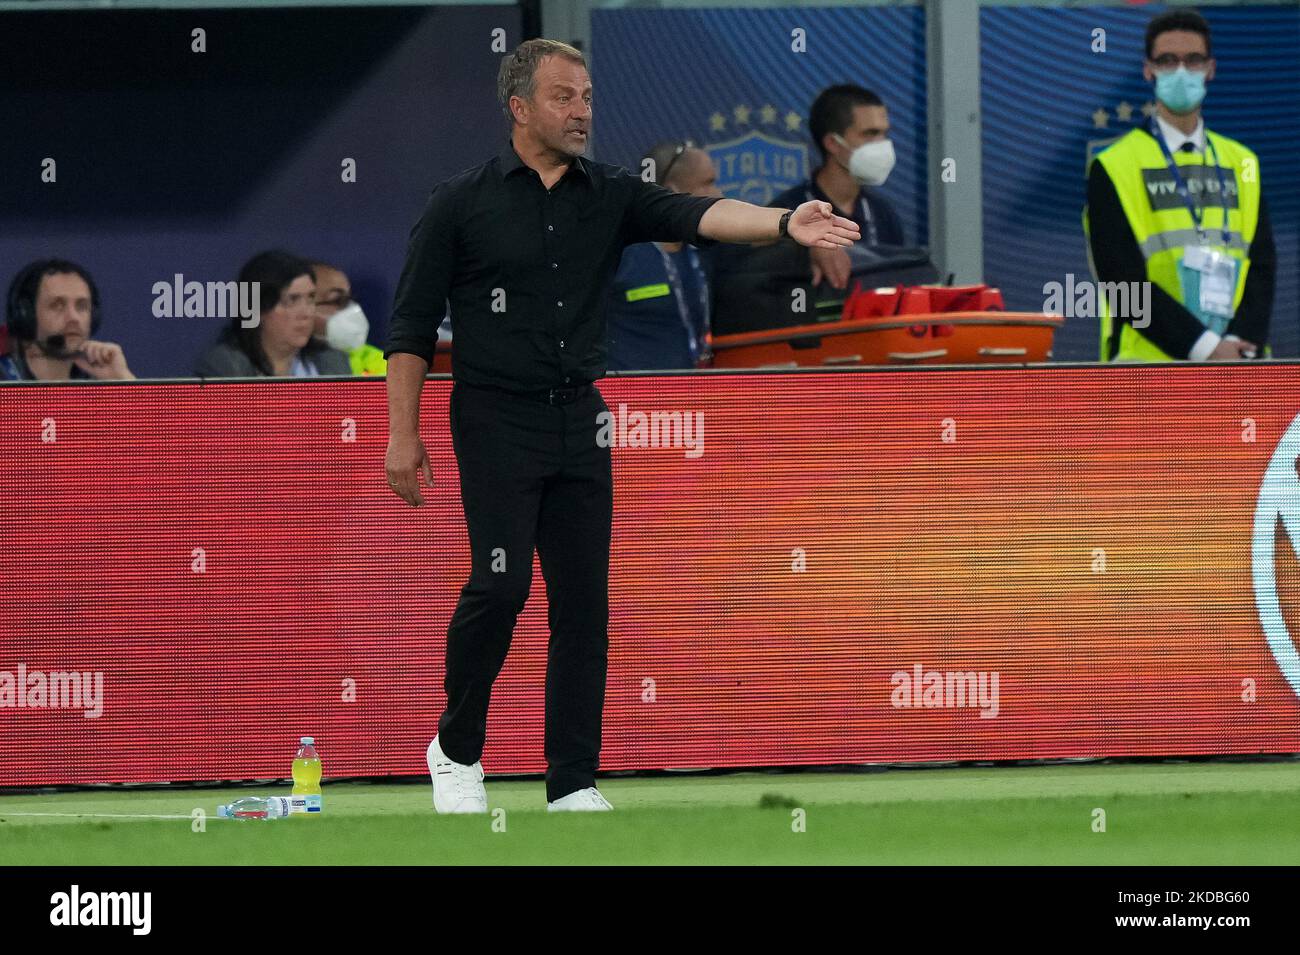 Hans-Dieter Flick manager of Germany gestures during the UEFA Nations League match between Italy and Germany at Stadio Renato Dall'Ara, Bologna, Italy on 4 June 2022. (Photo by Giuseppe Maffia/NurPhoto) Stock Photo